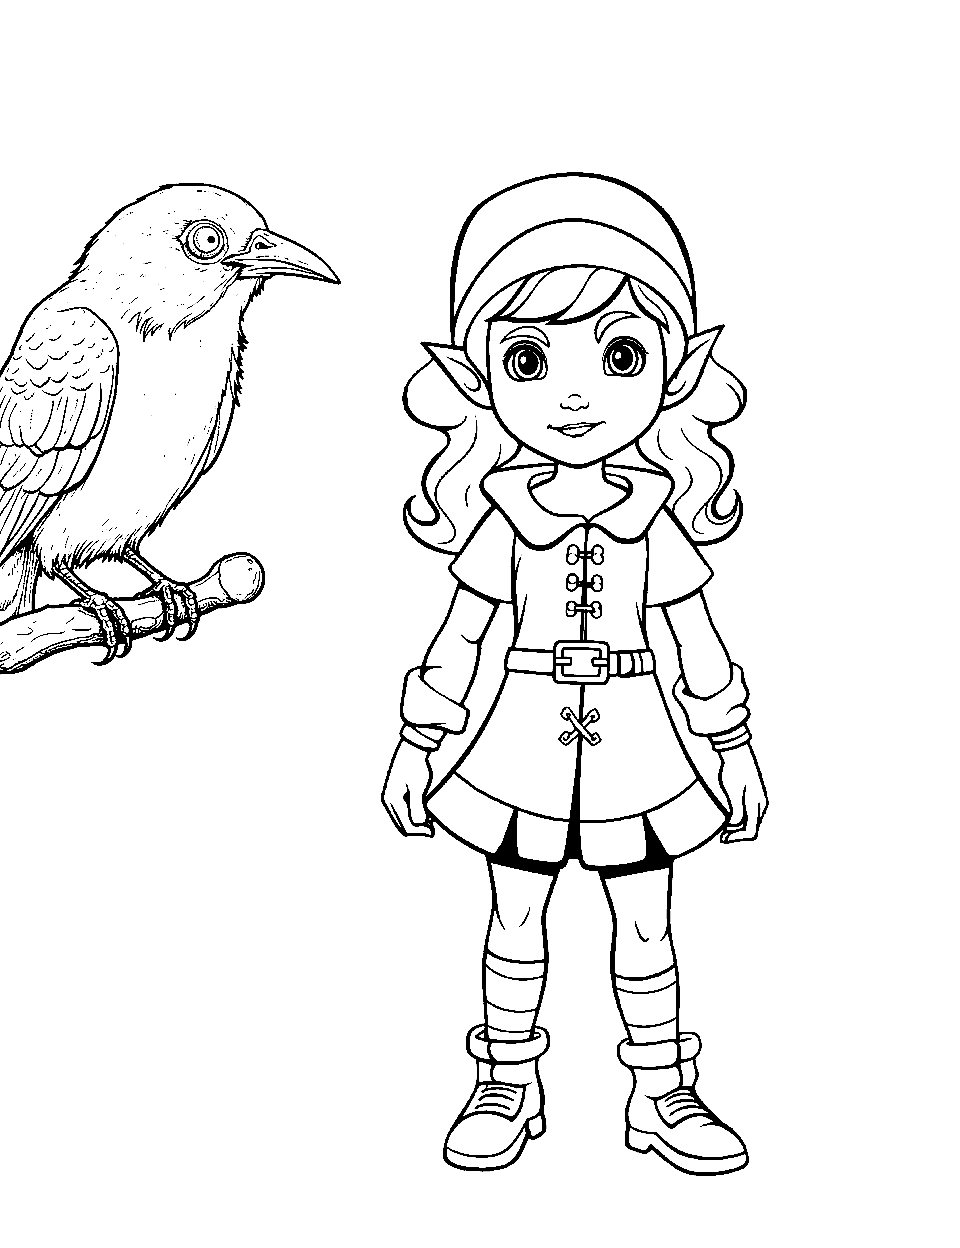 Gothic Elf with a Raven Coloring Page - A gothic-style elf standing beside a raven.